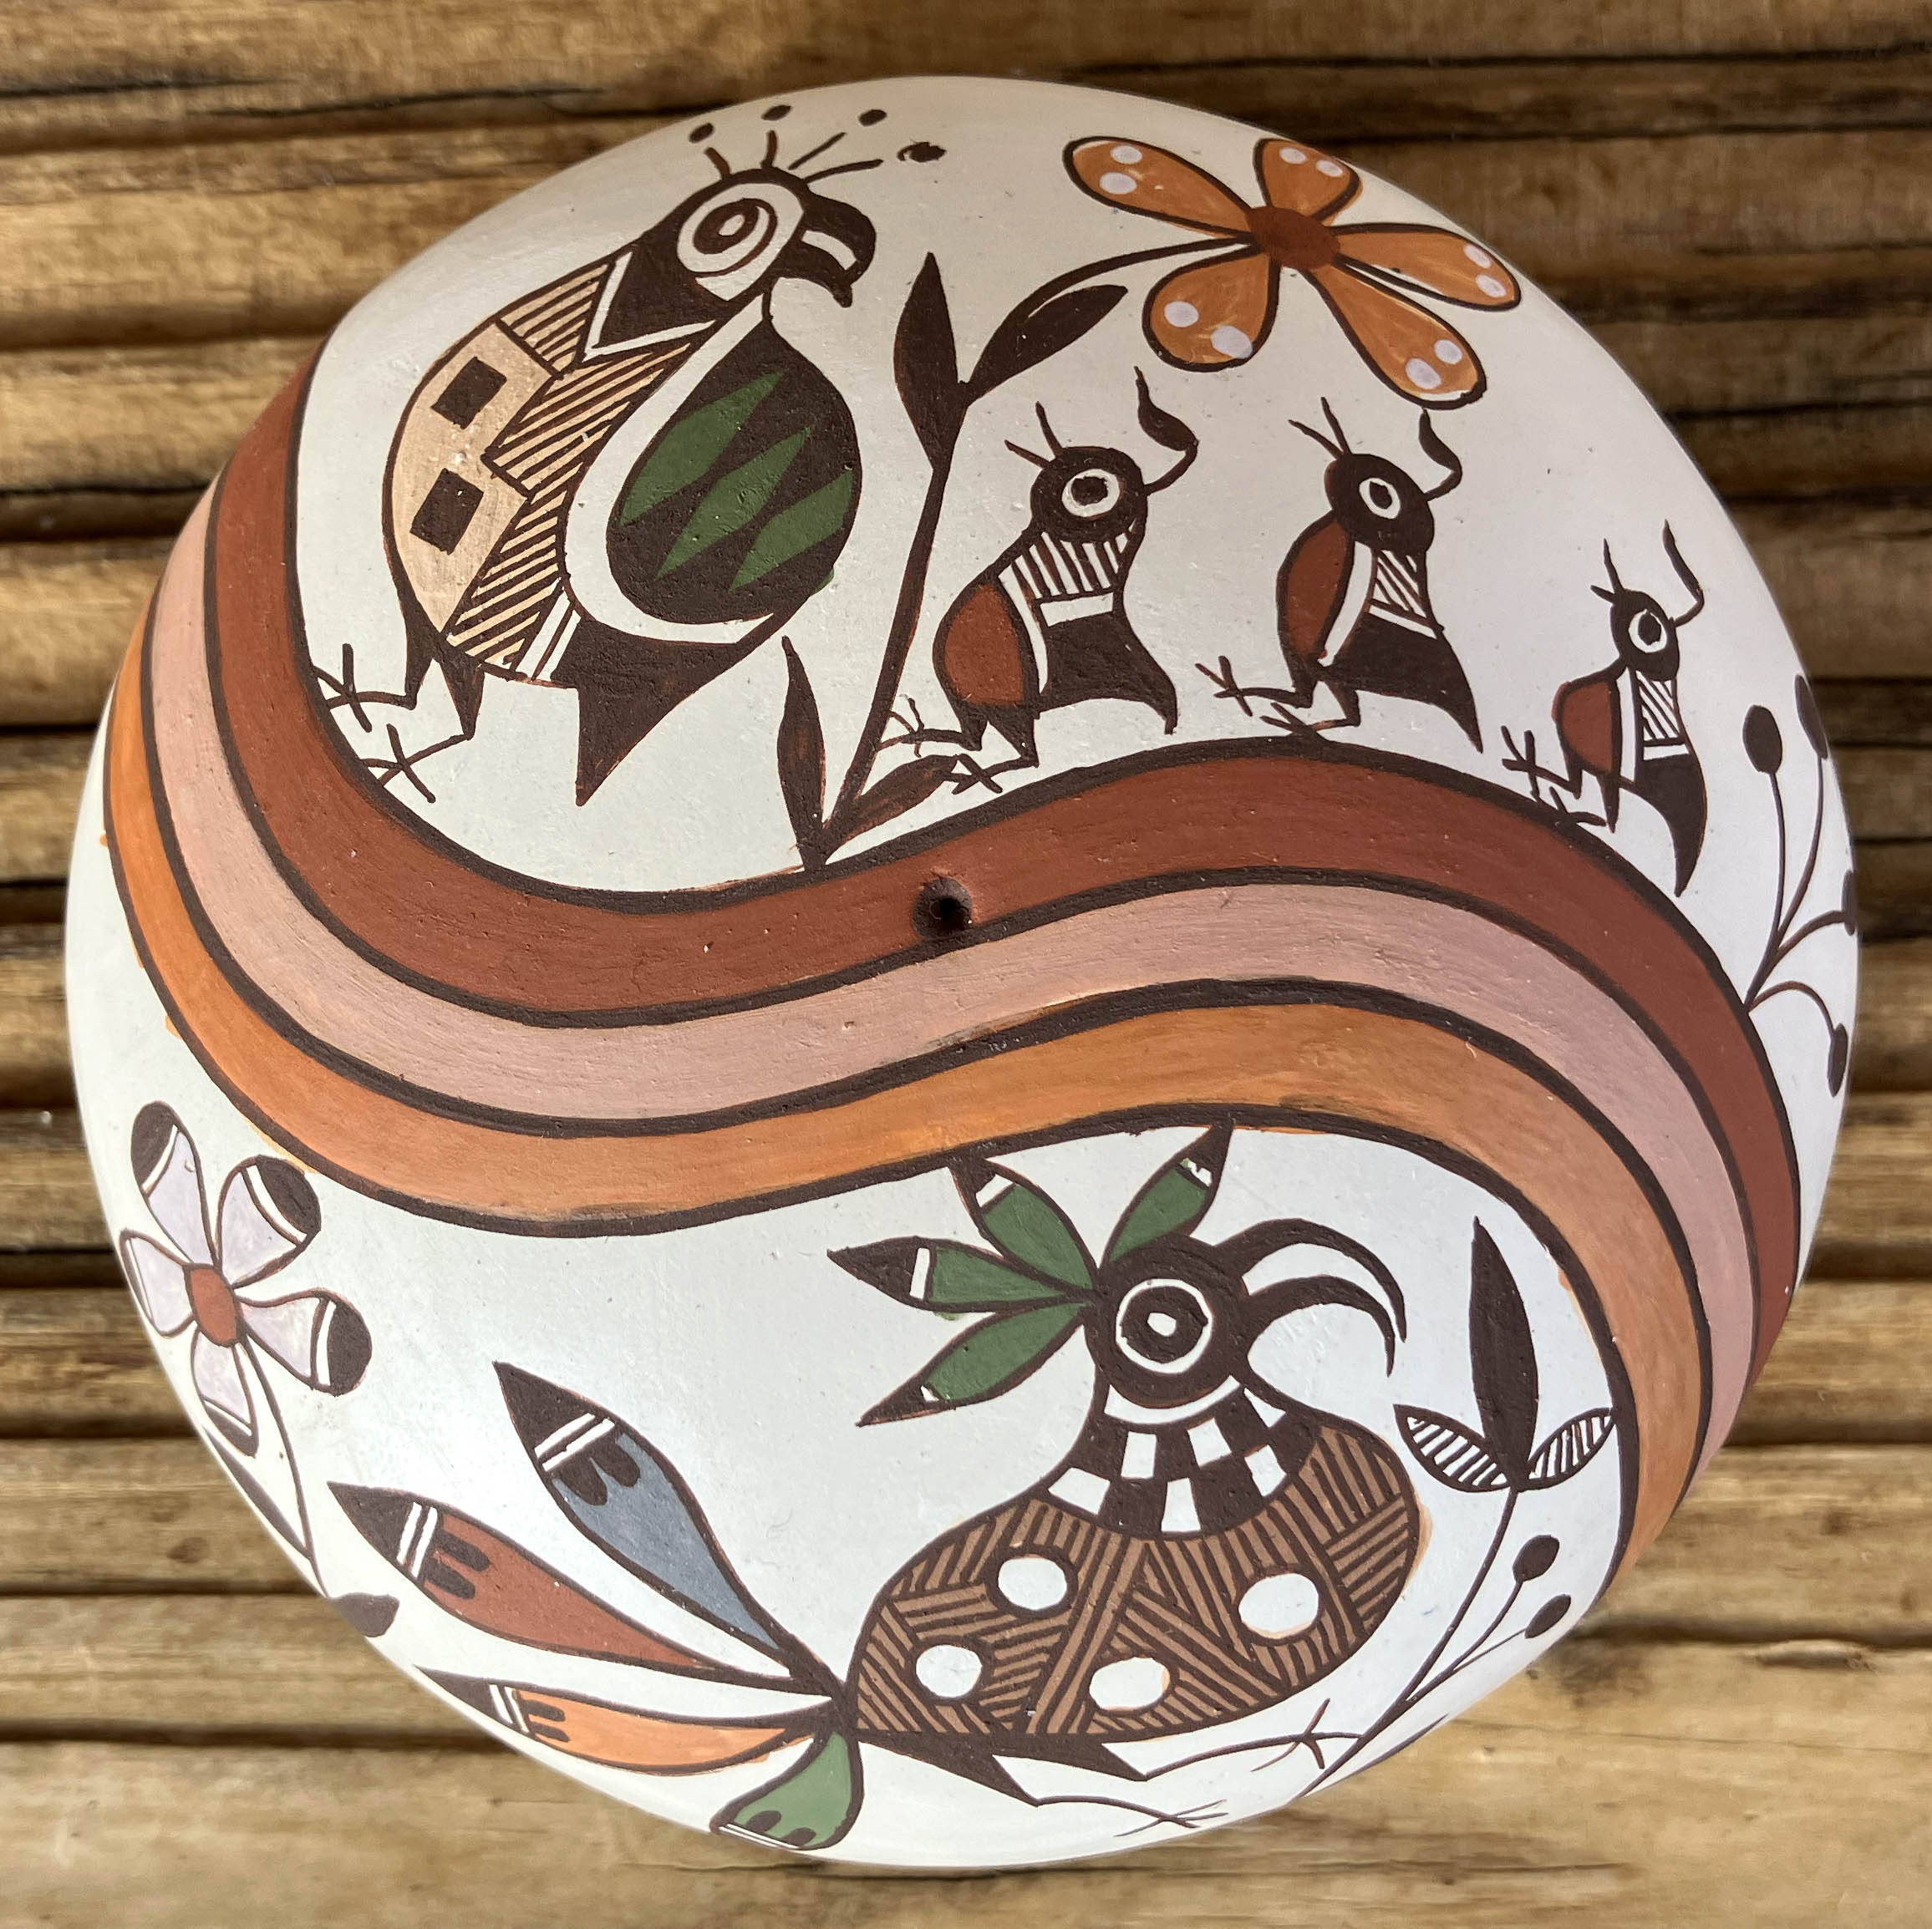 Diane Lewis | Acoma Plate | Penfield Gallery of Indian Arts | Albuquerque, New Mexico